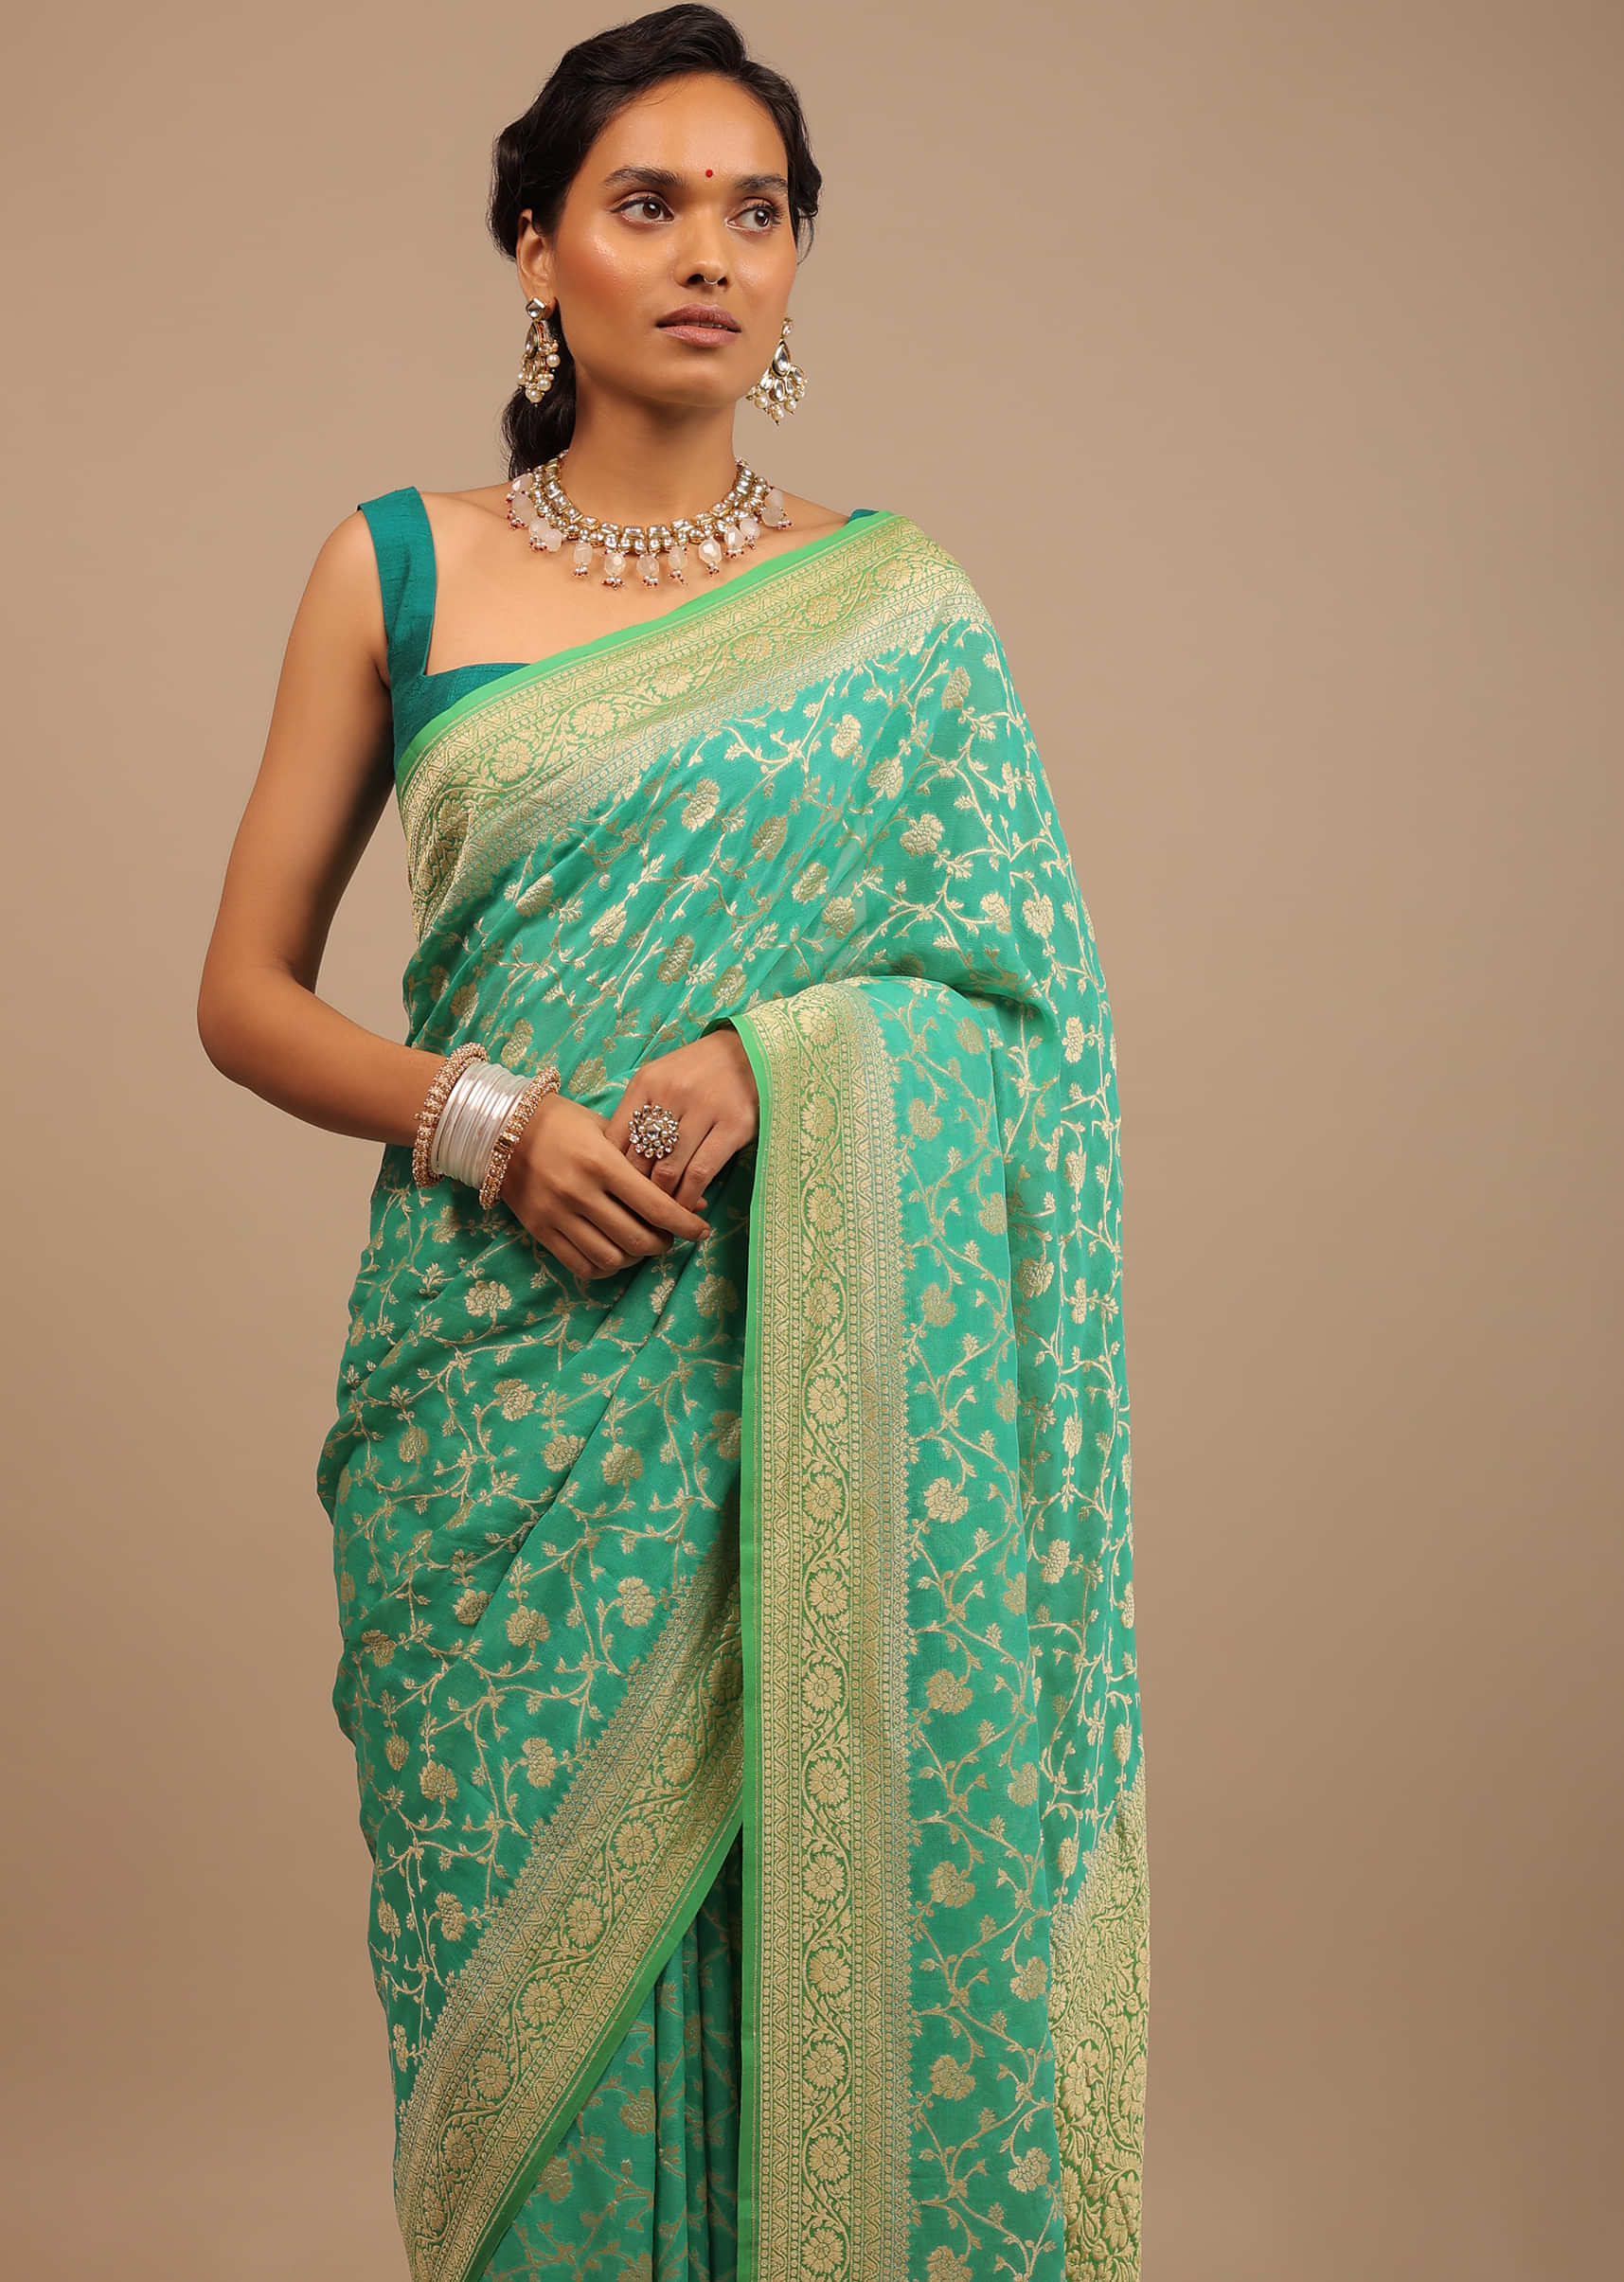 Peacock Green Traditional Saree Made With Georgette And A Beautiful Woven Floral Jaal